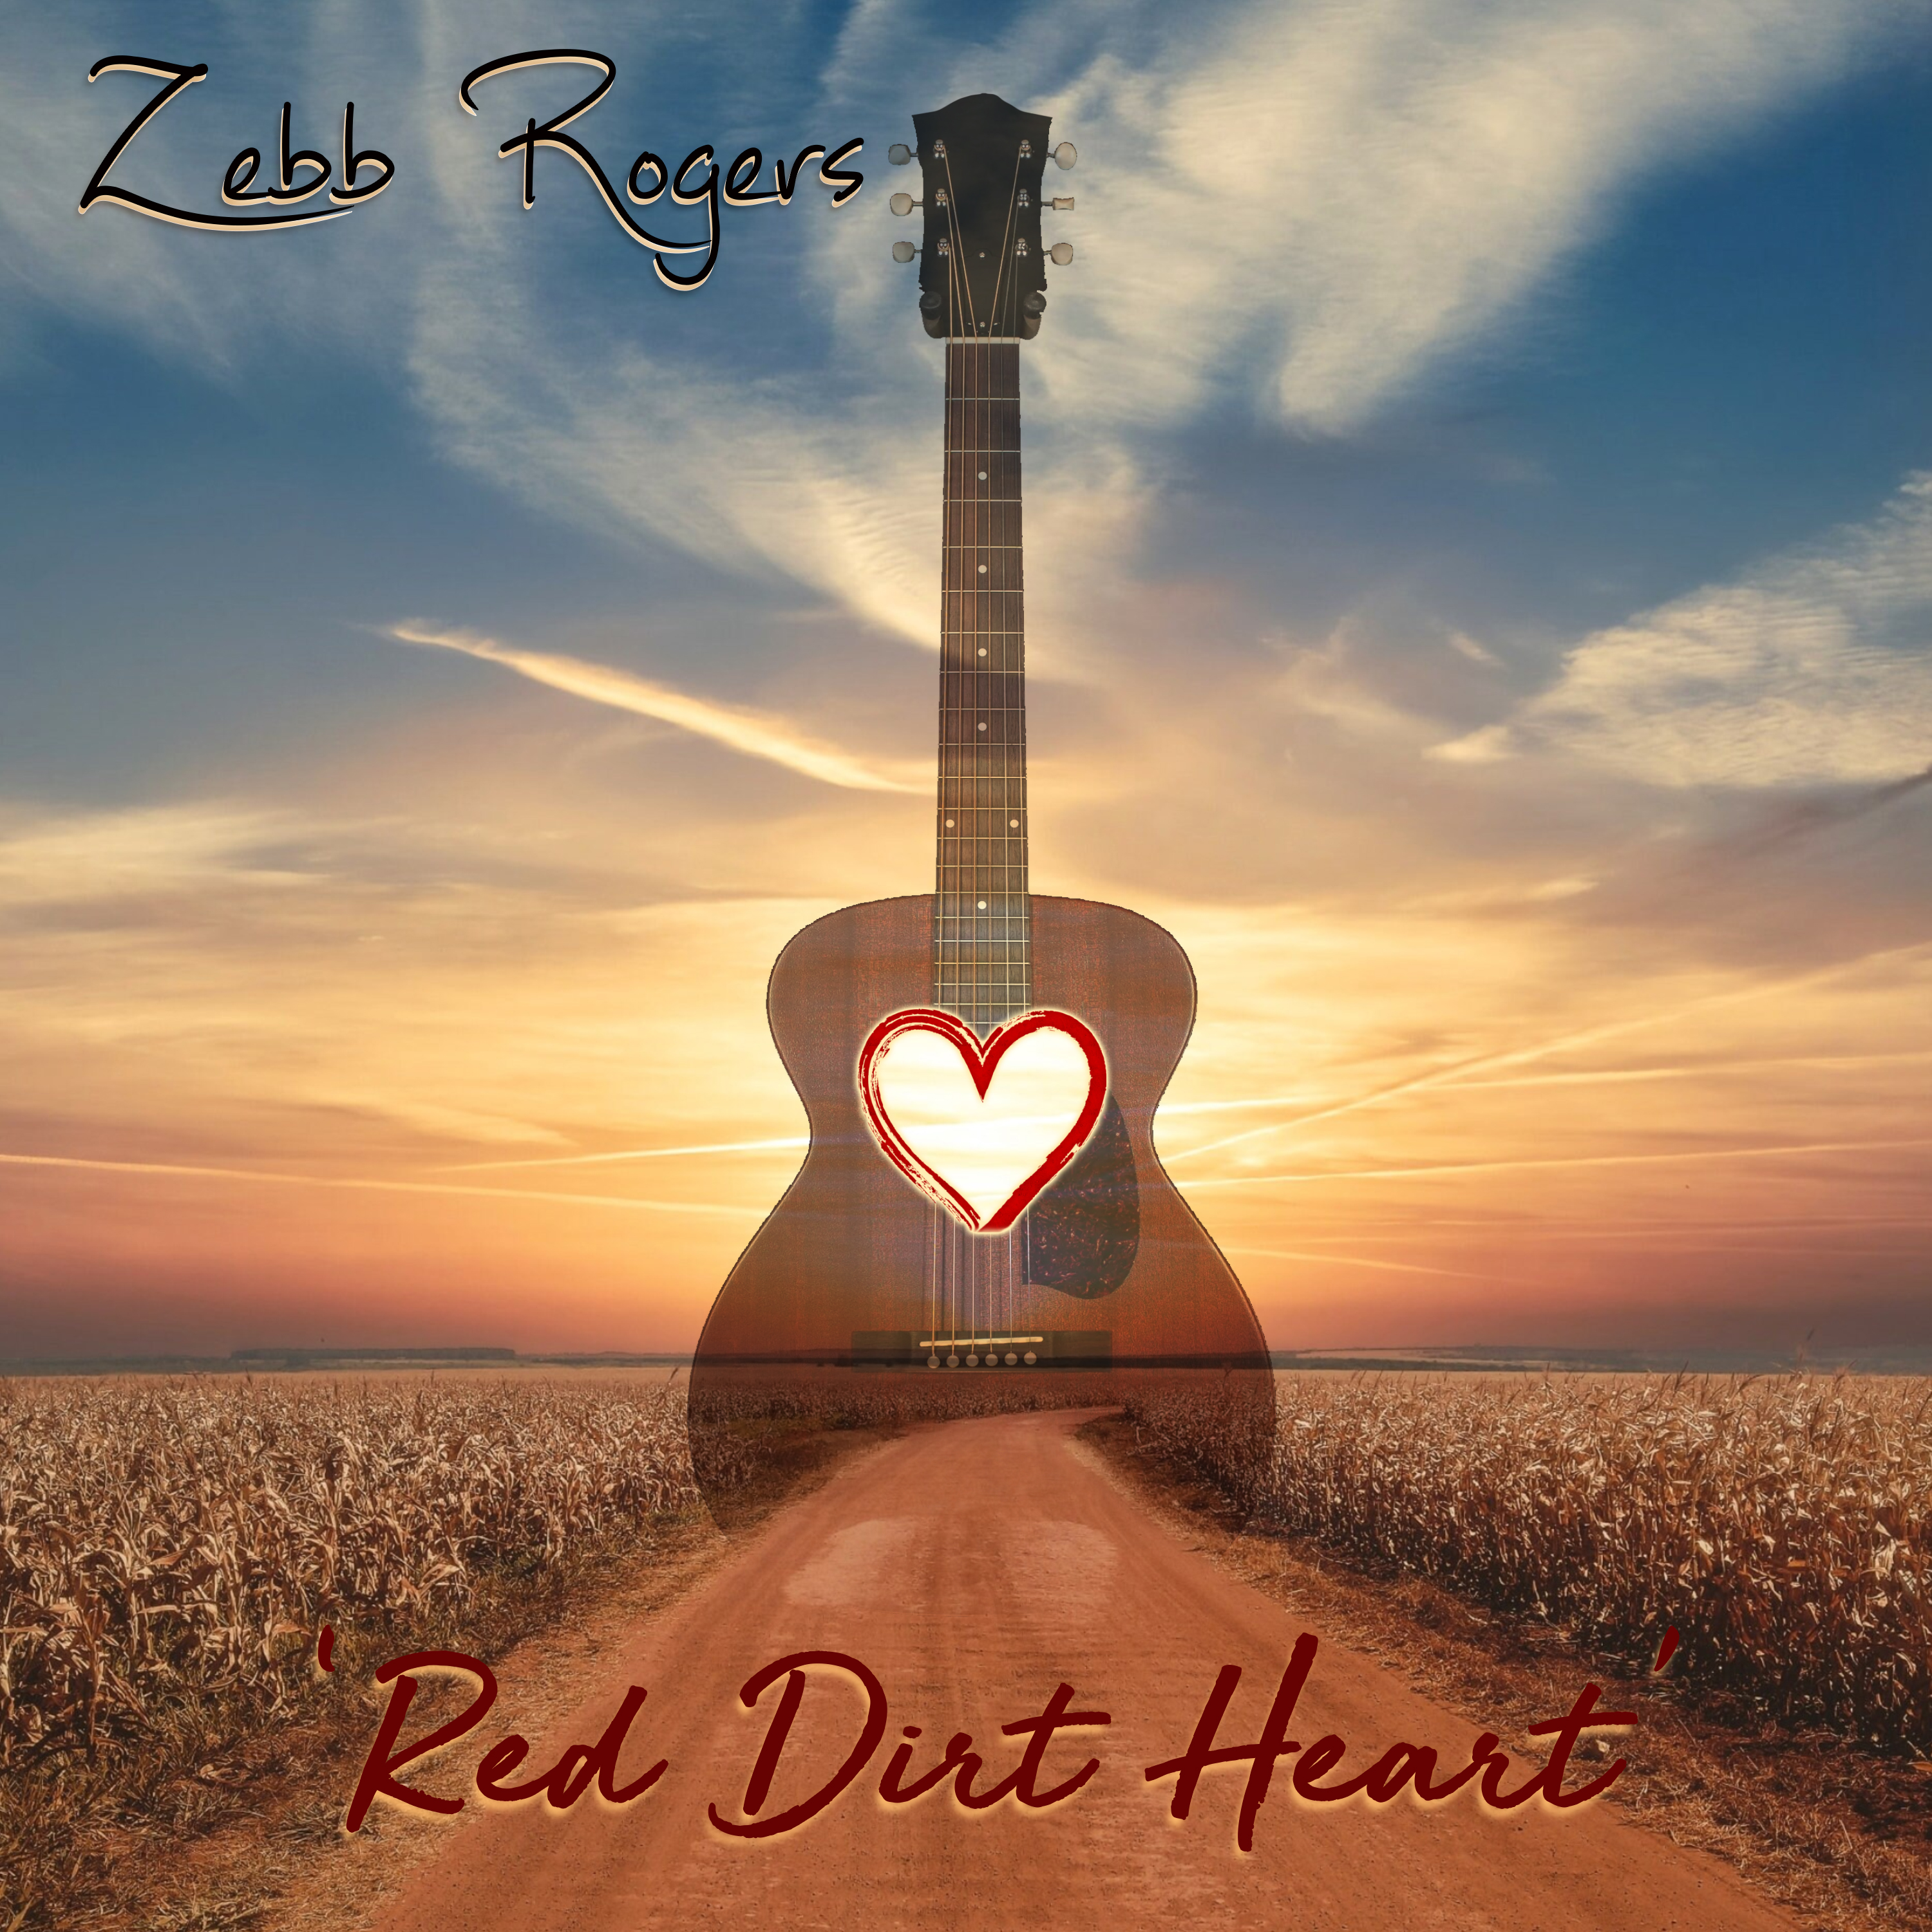 Art for Red Dirt Heart by Zebb Rogers